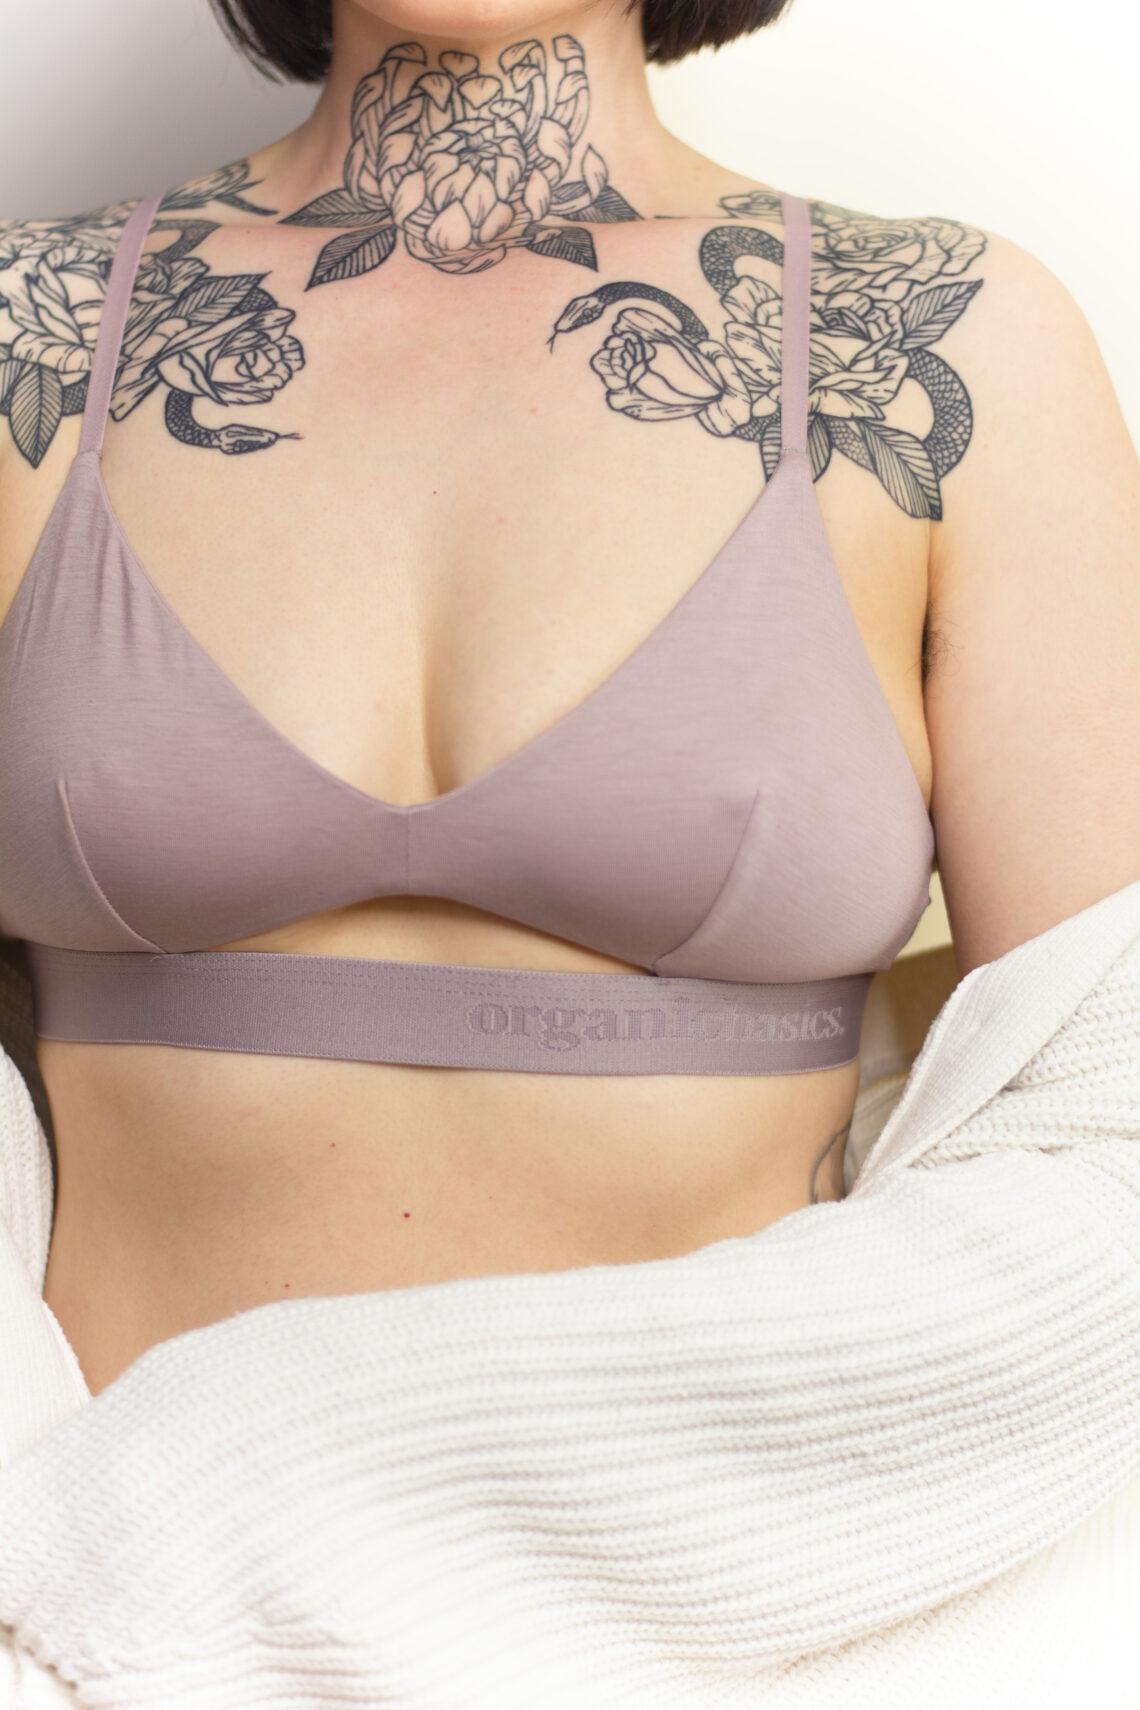 trying on all Organic Basics bras l sustainable fashion review